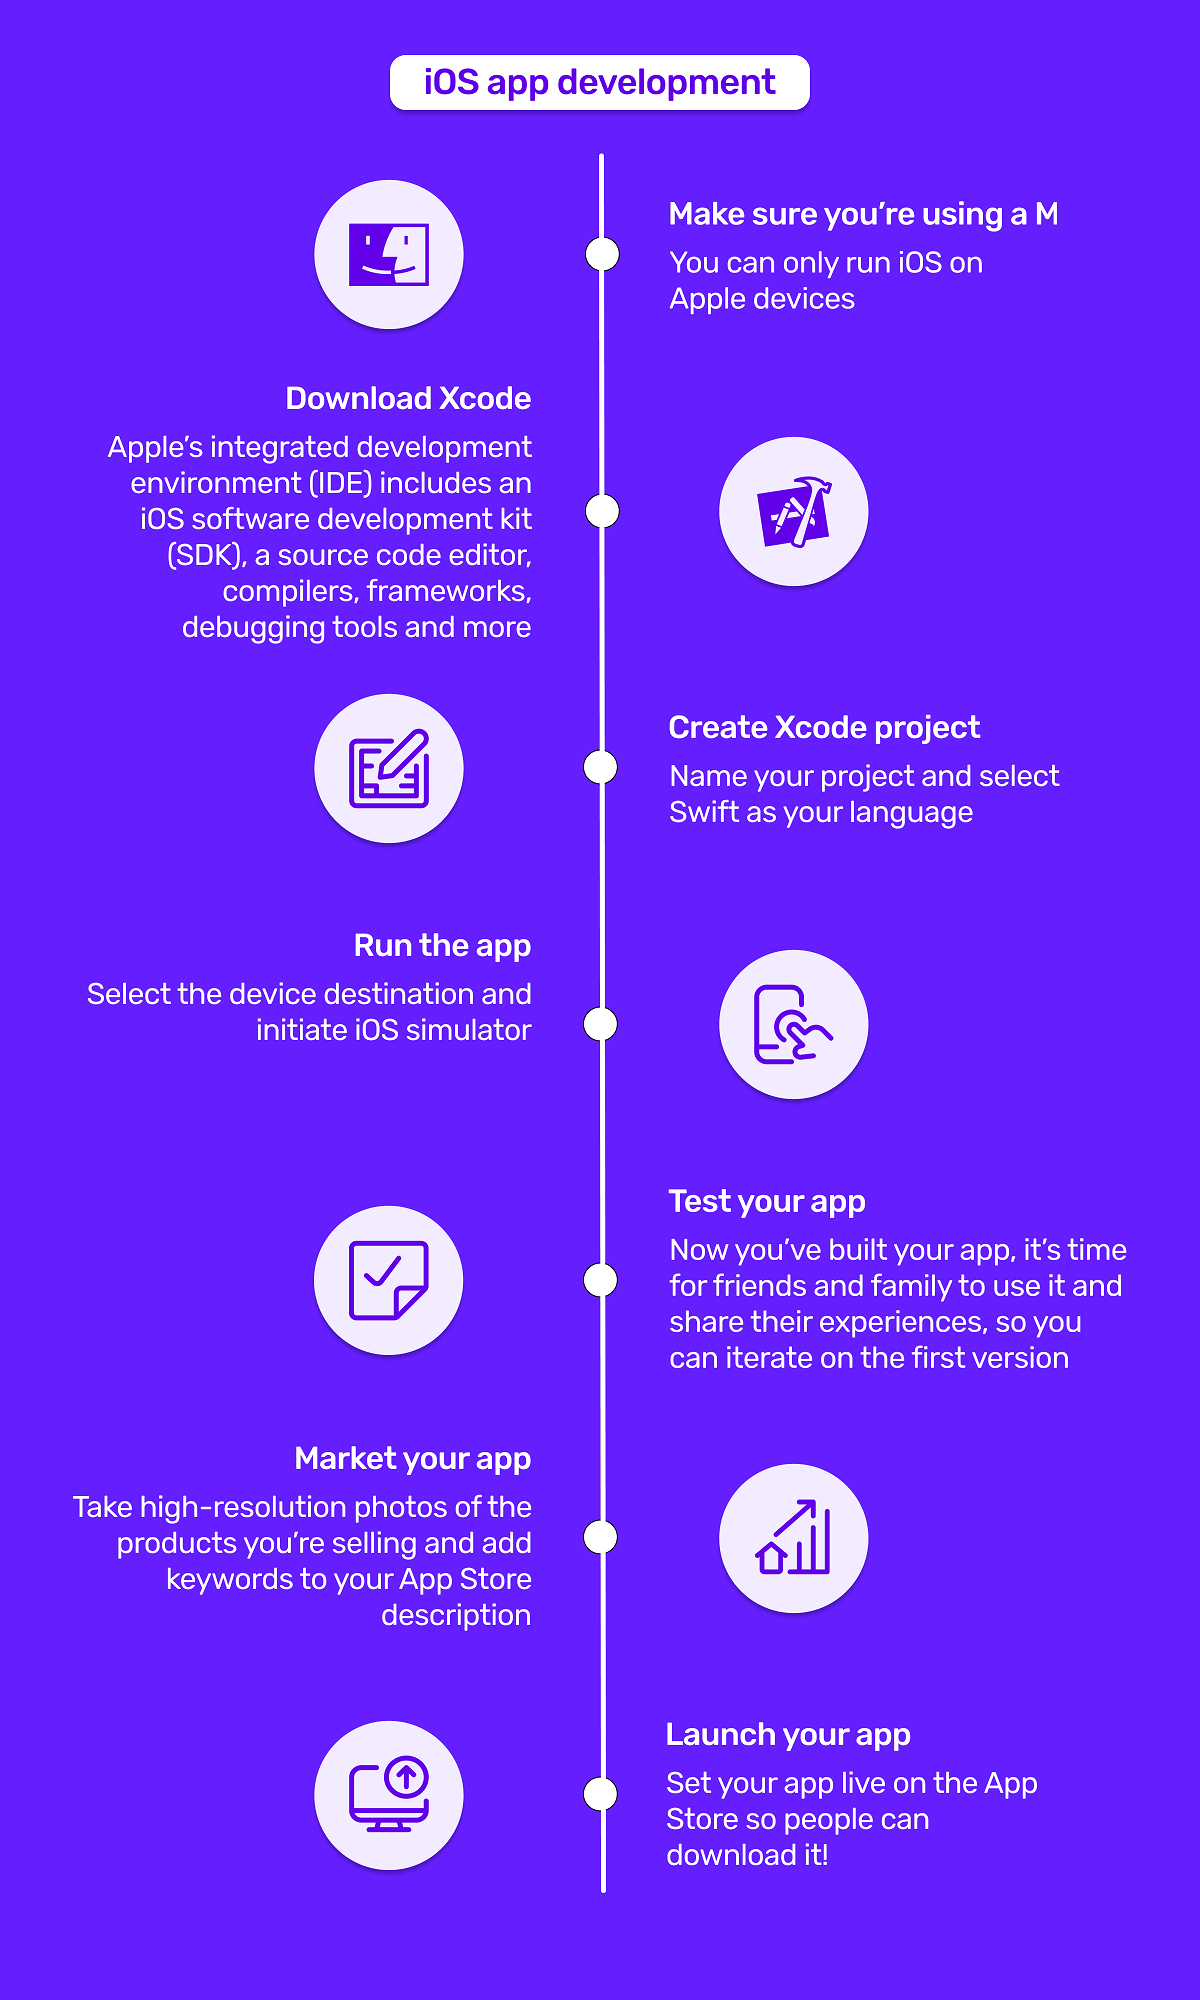 7-step process for starting iOS app development - an infographic by Builder.ai